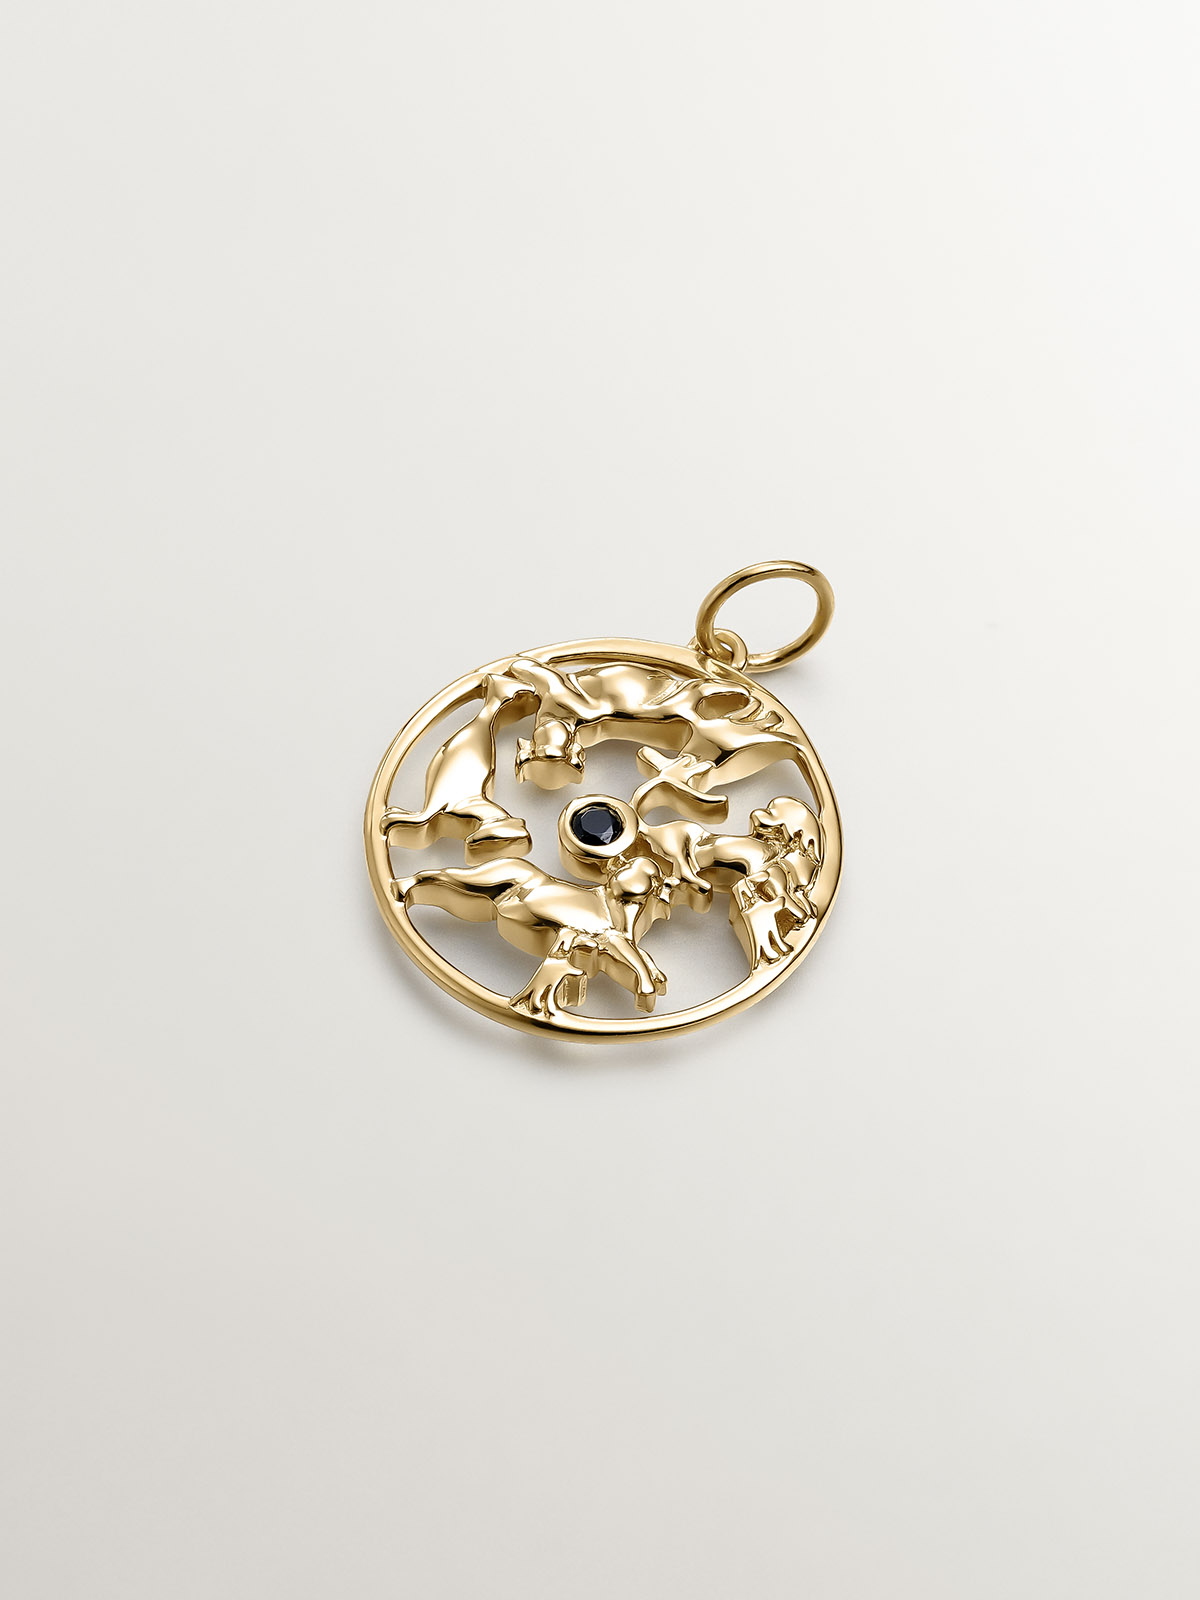 925 silver charm bathed in 18k yellow gold with black spinel and animals